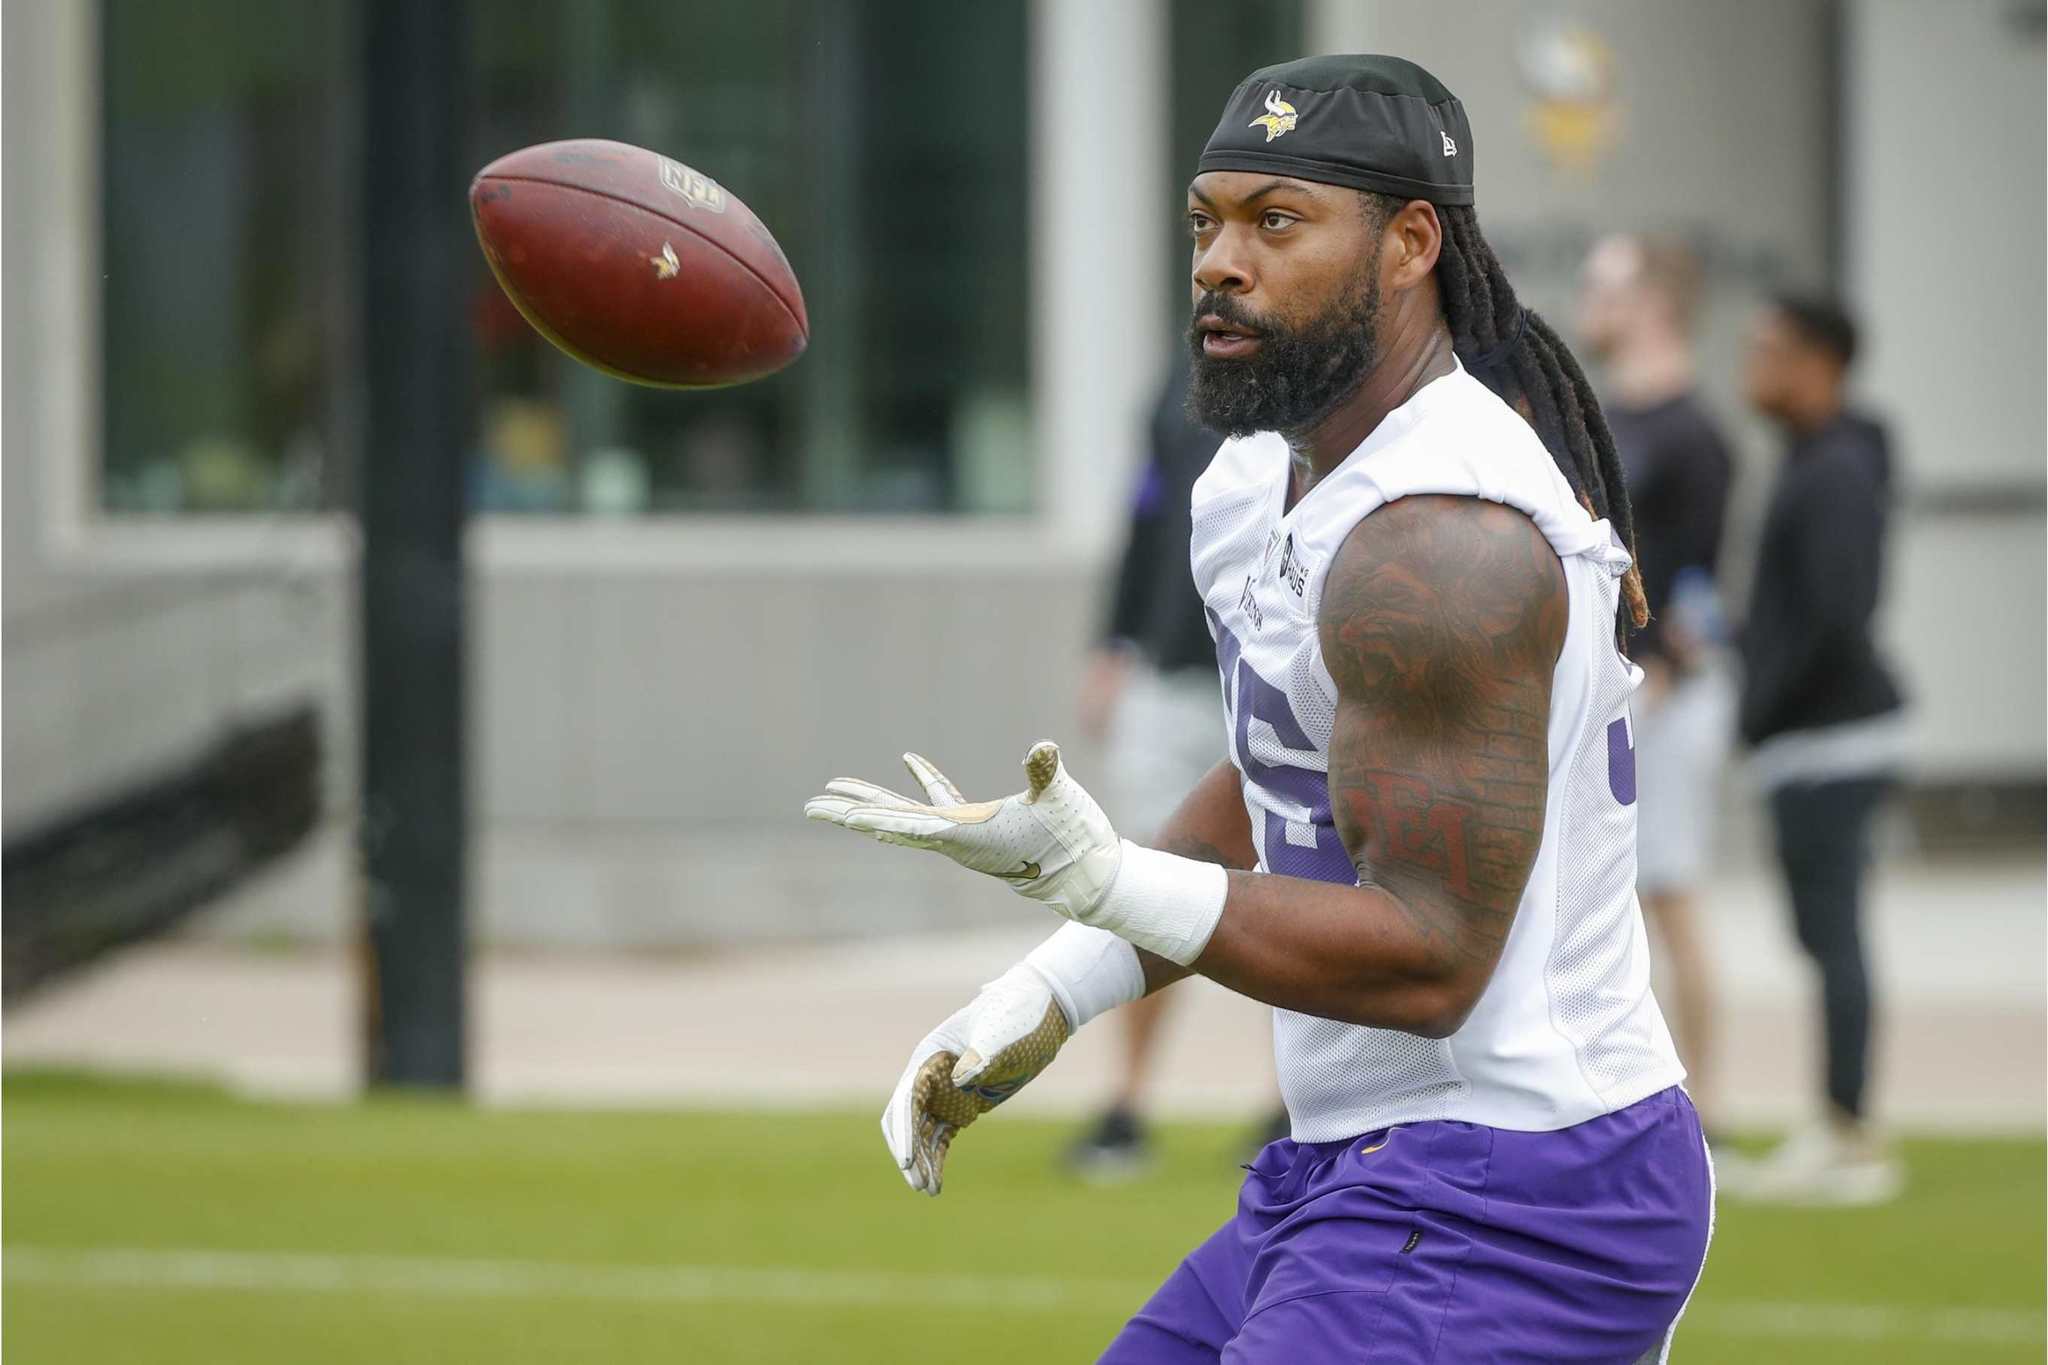 Awkward: Vikings Pro-Bowl star says bye to fans, despite team denying his  release